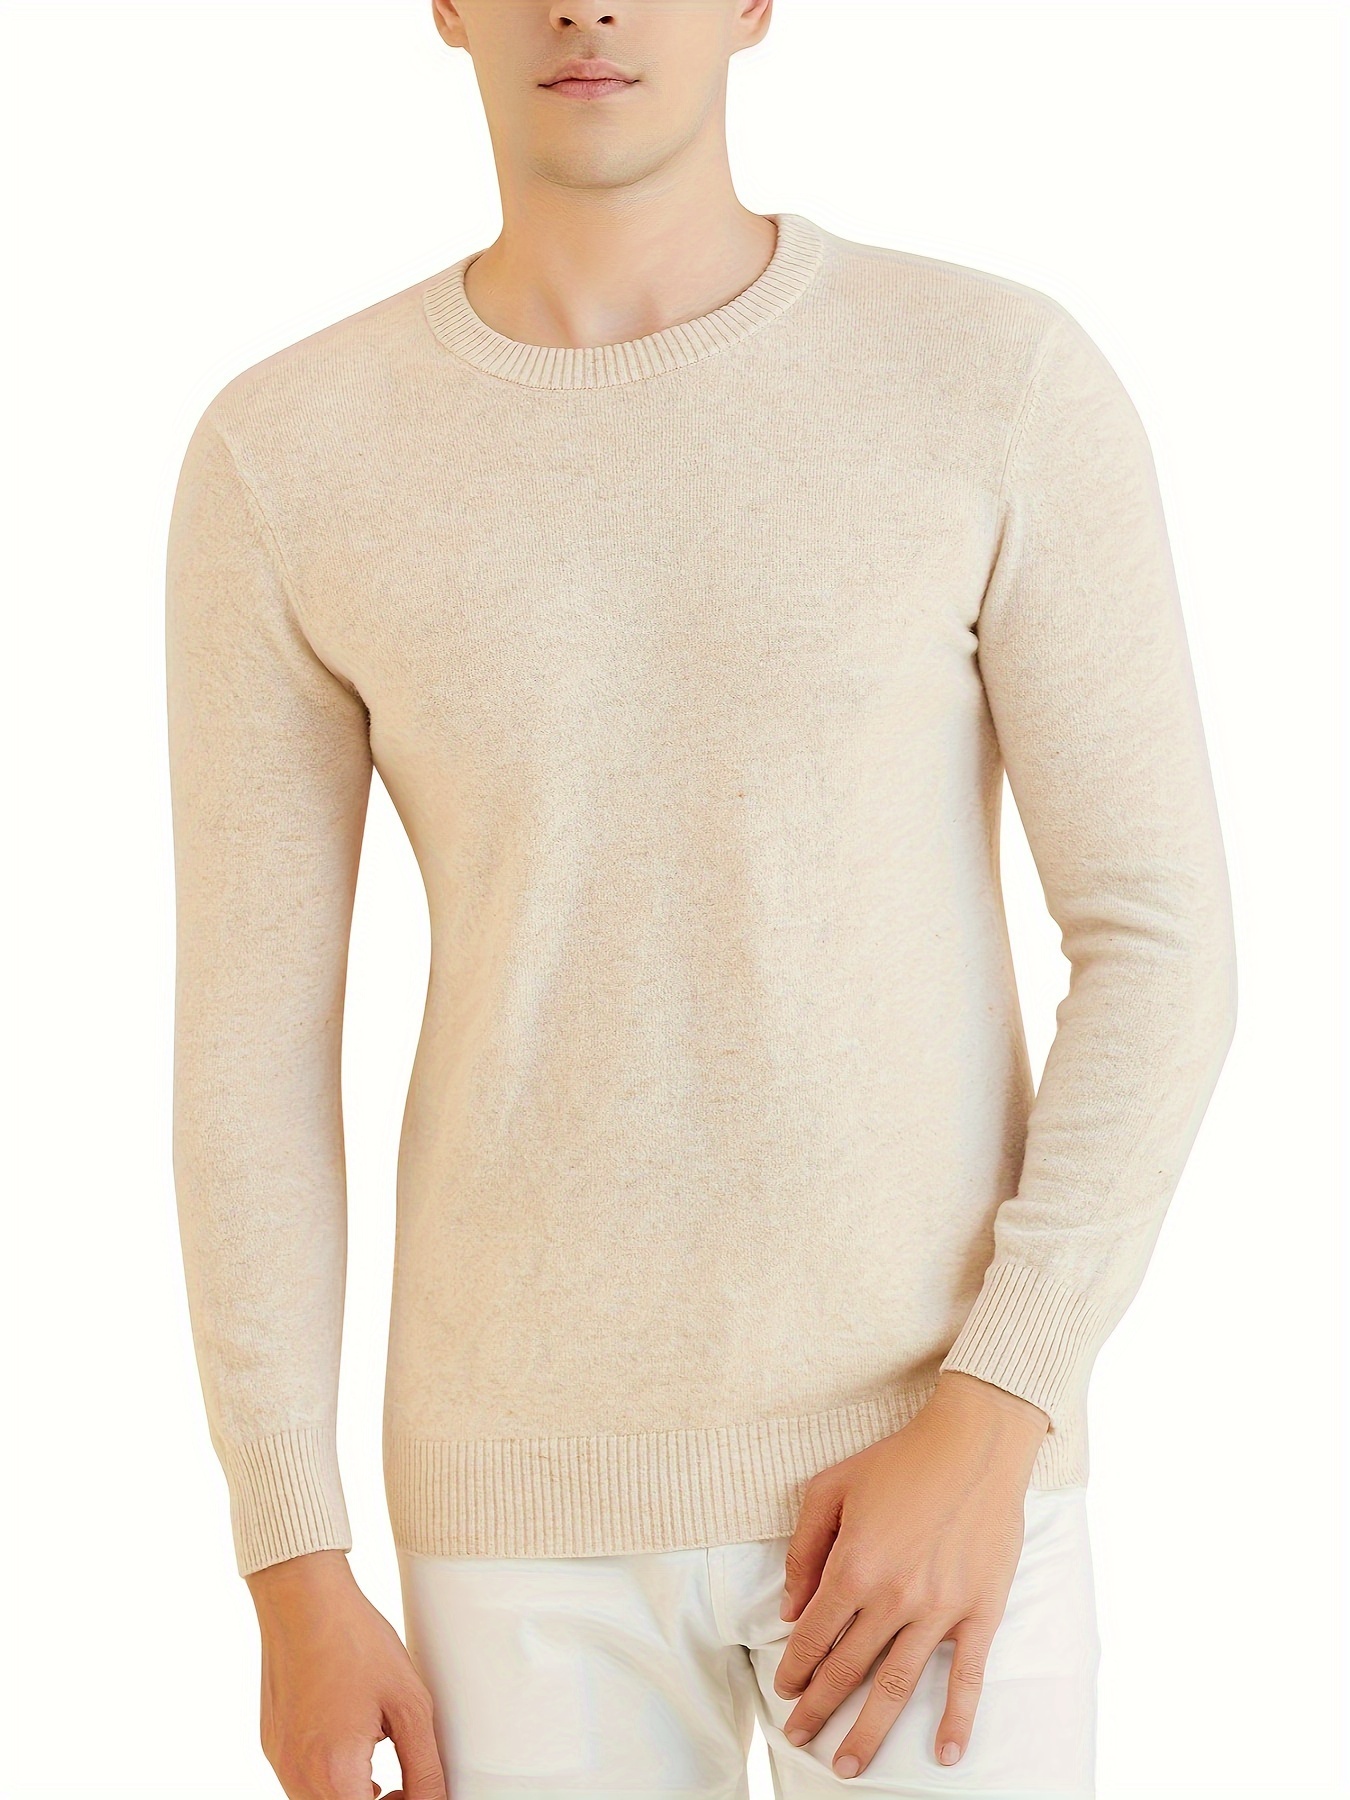 * Men's Crew Neck 100% Merino Wool Sweater 2023 Fall Winter Warm Long  Sleeve Knitted Pullover Sweater Tops